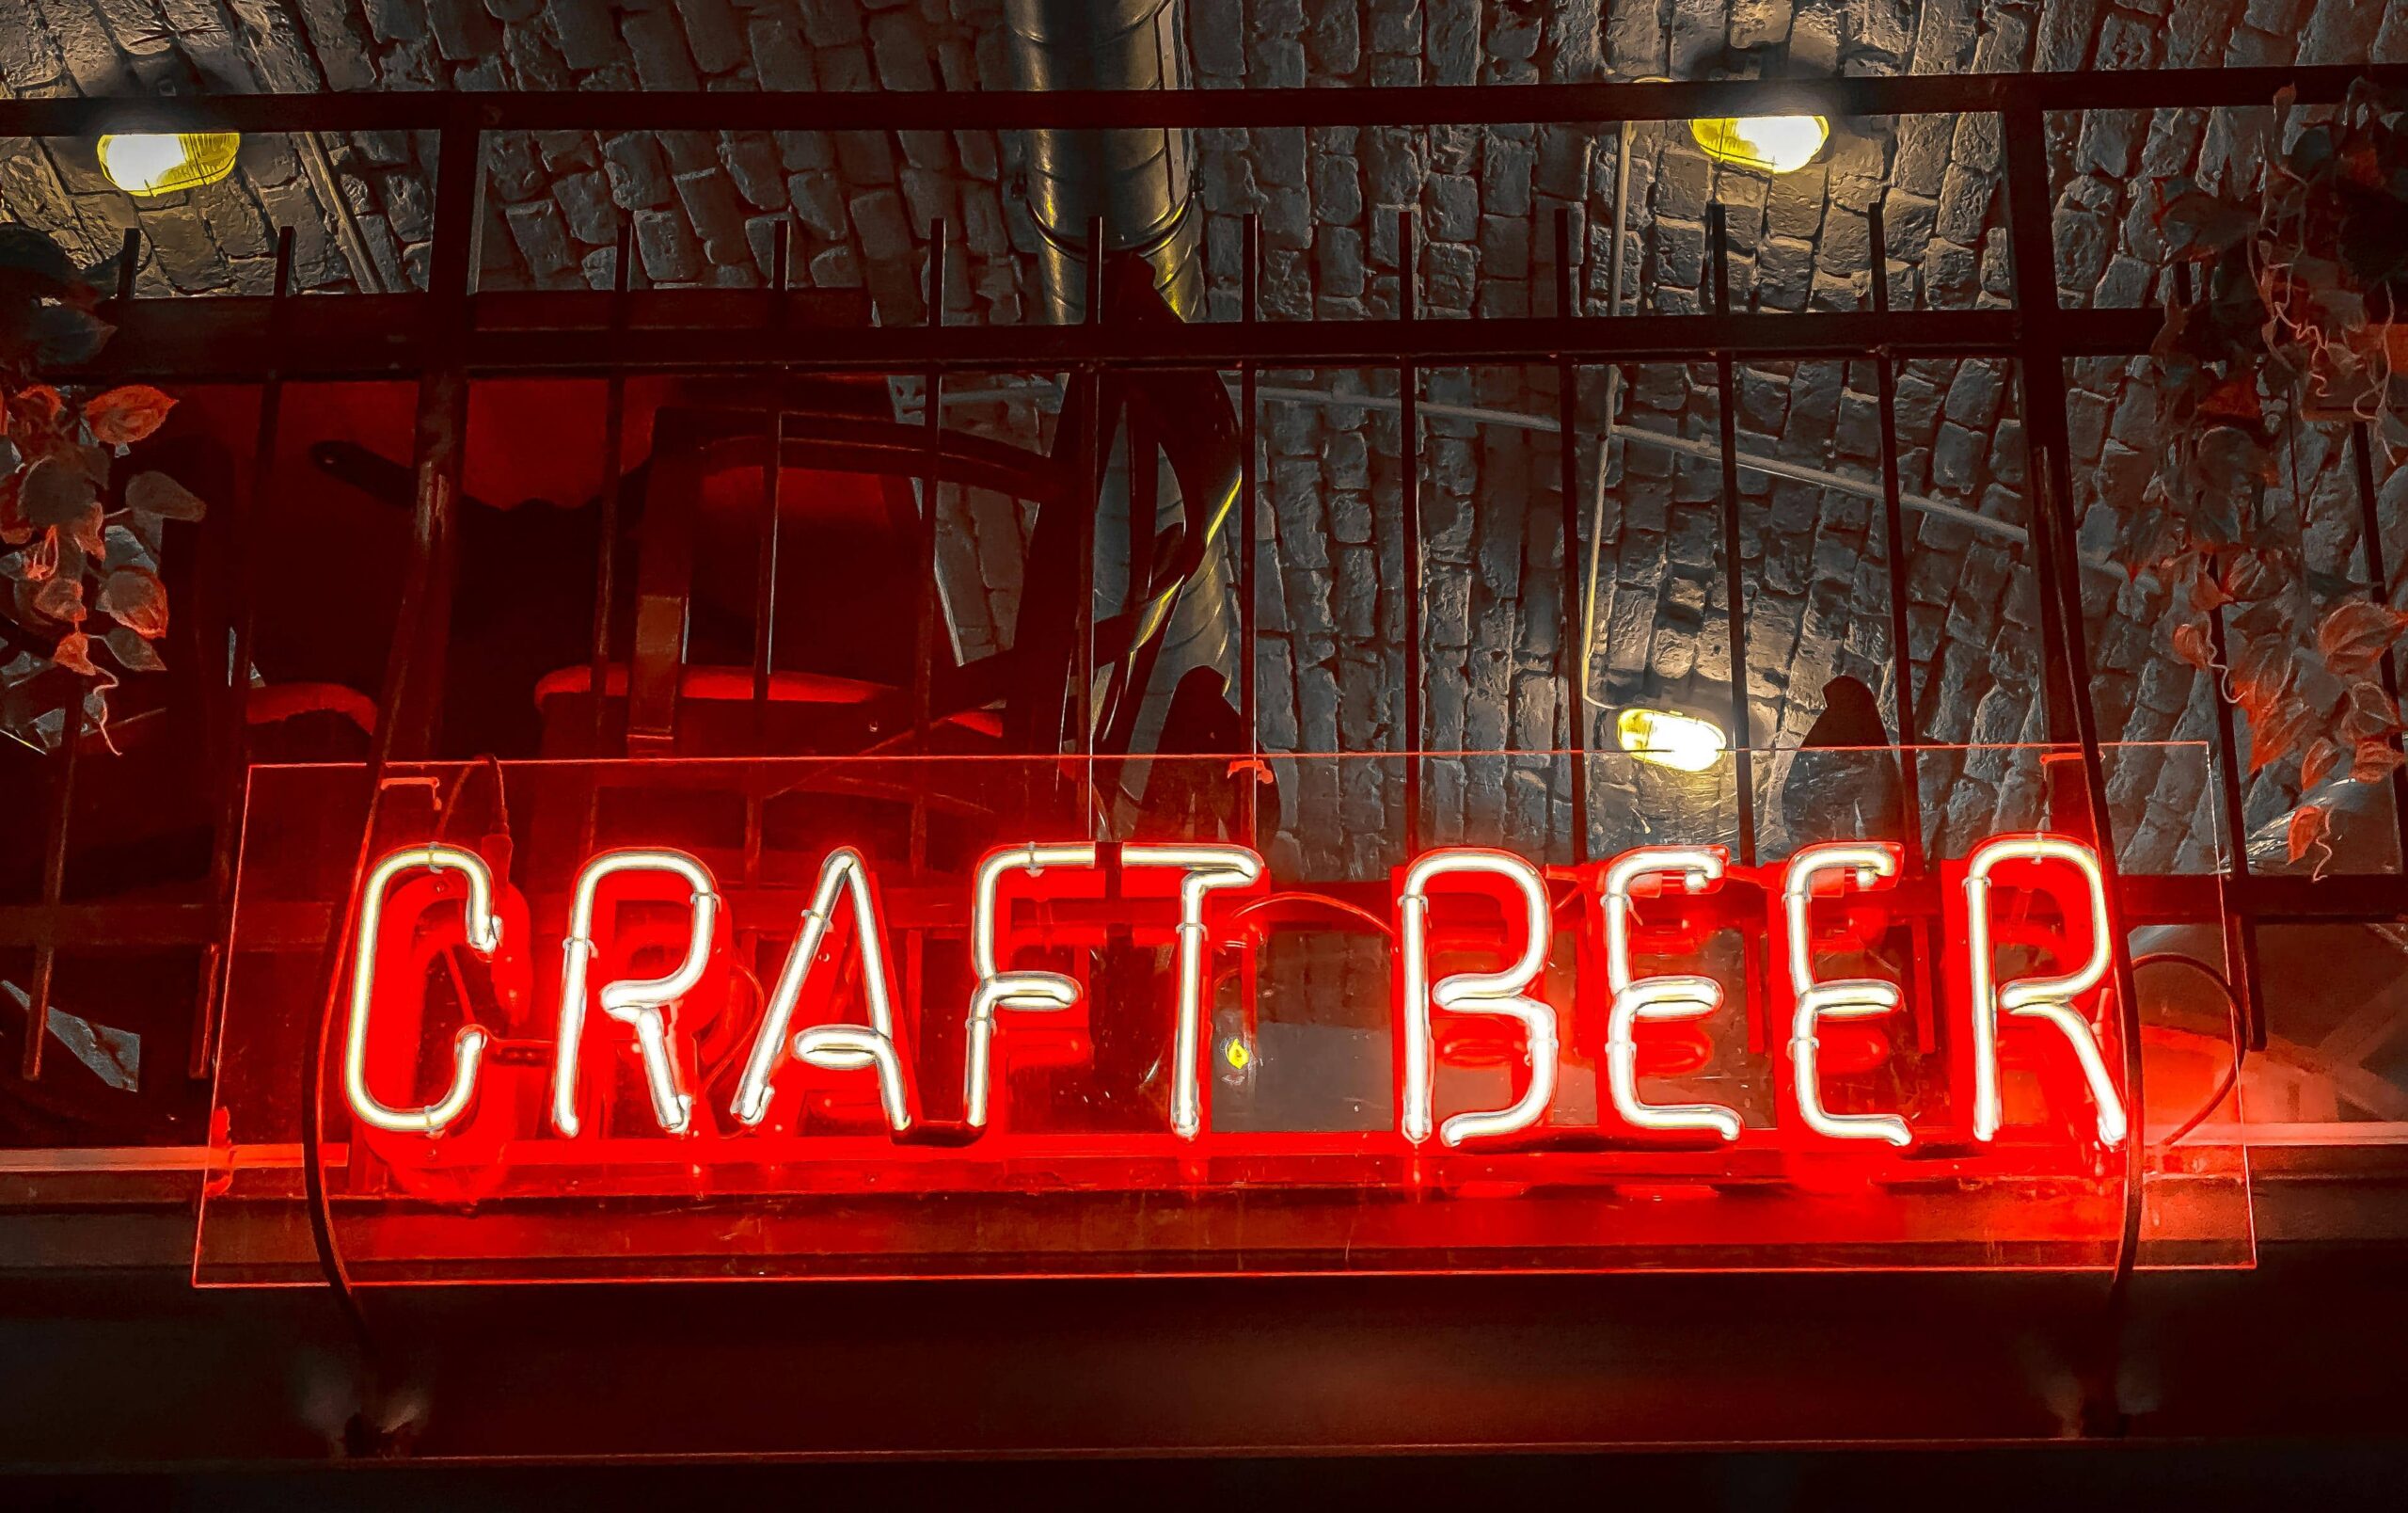 Read more about the article Craft Beer Trails: Tasting the Best Brews and Microbreweries Across the UK